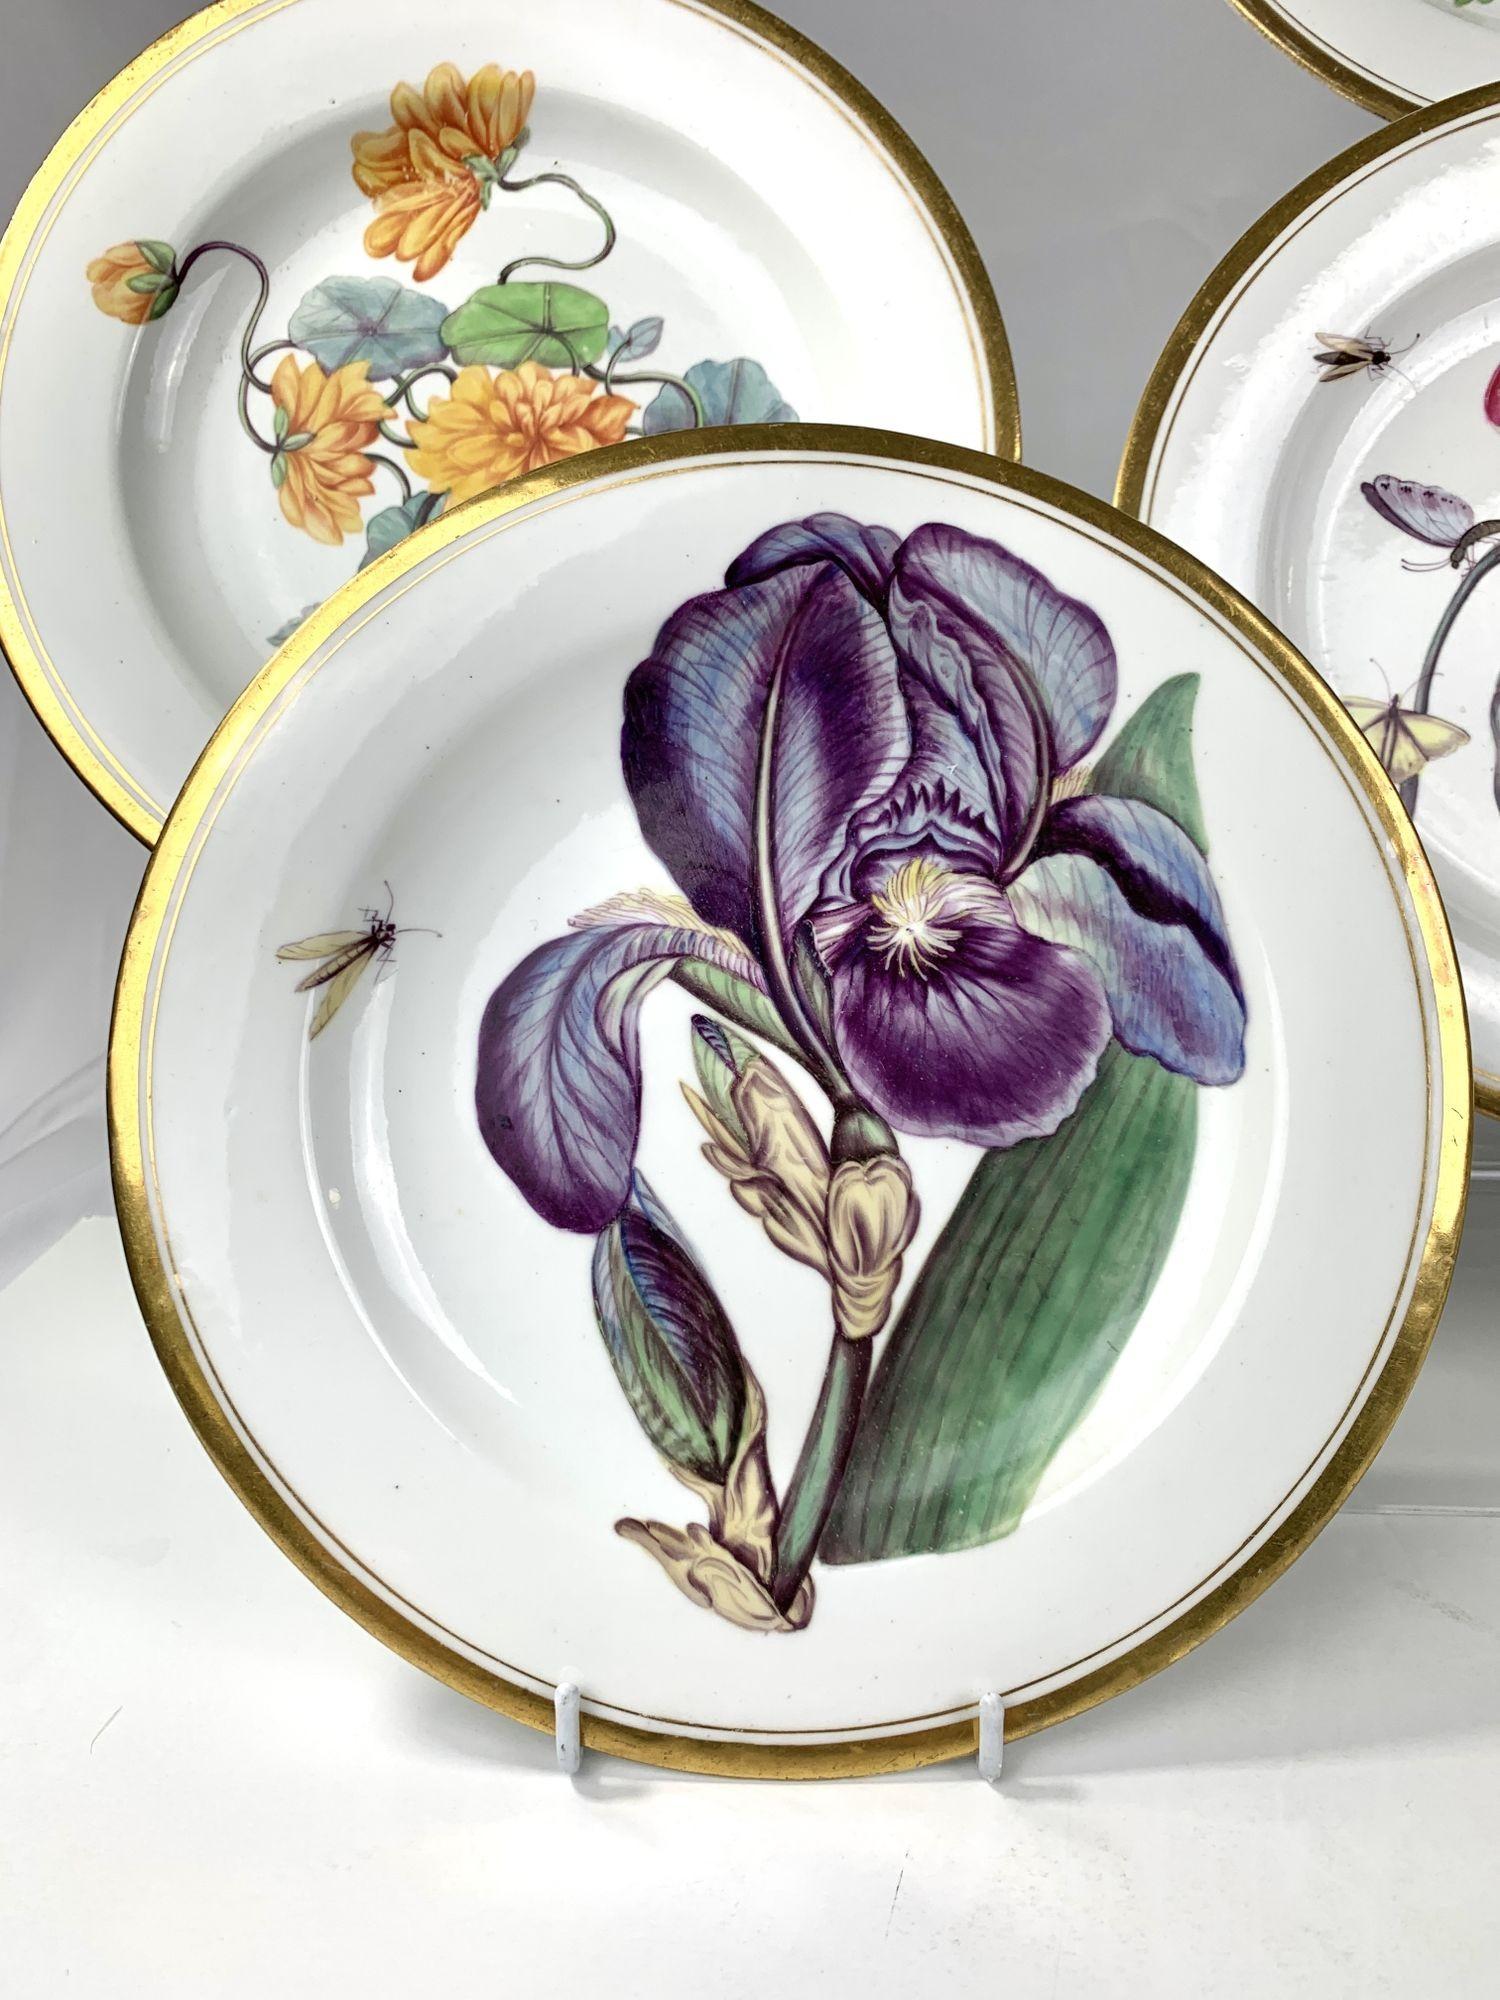 Bardith has been in business for 58 years. The flowers on these cabinet plates are among the most beautiful we have ever owned. 
They are both flamboyant and natural.
The plates were made and hand-painted at Minton, an English factory, in the early